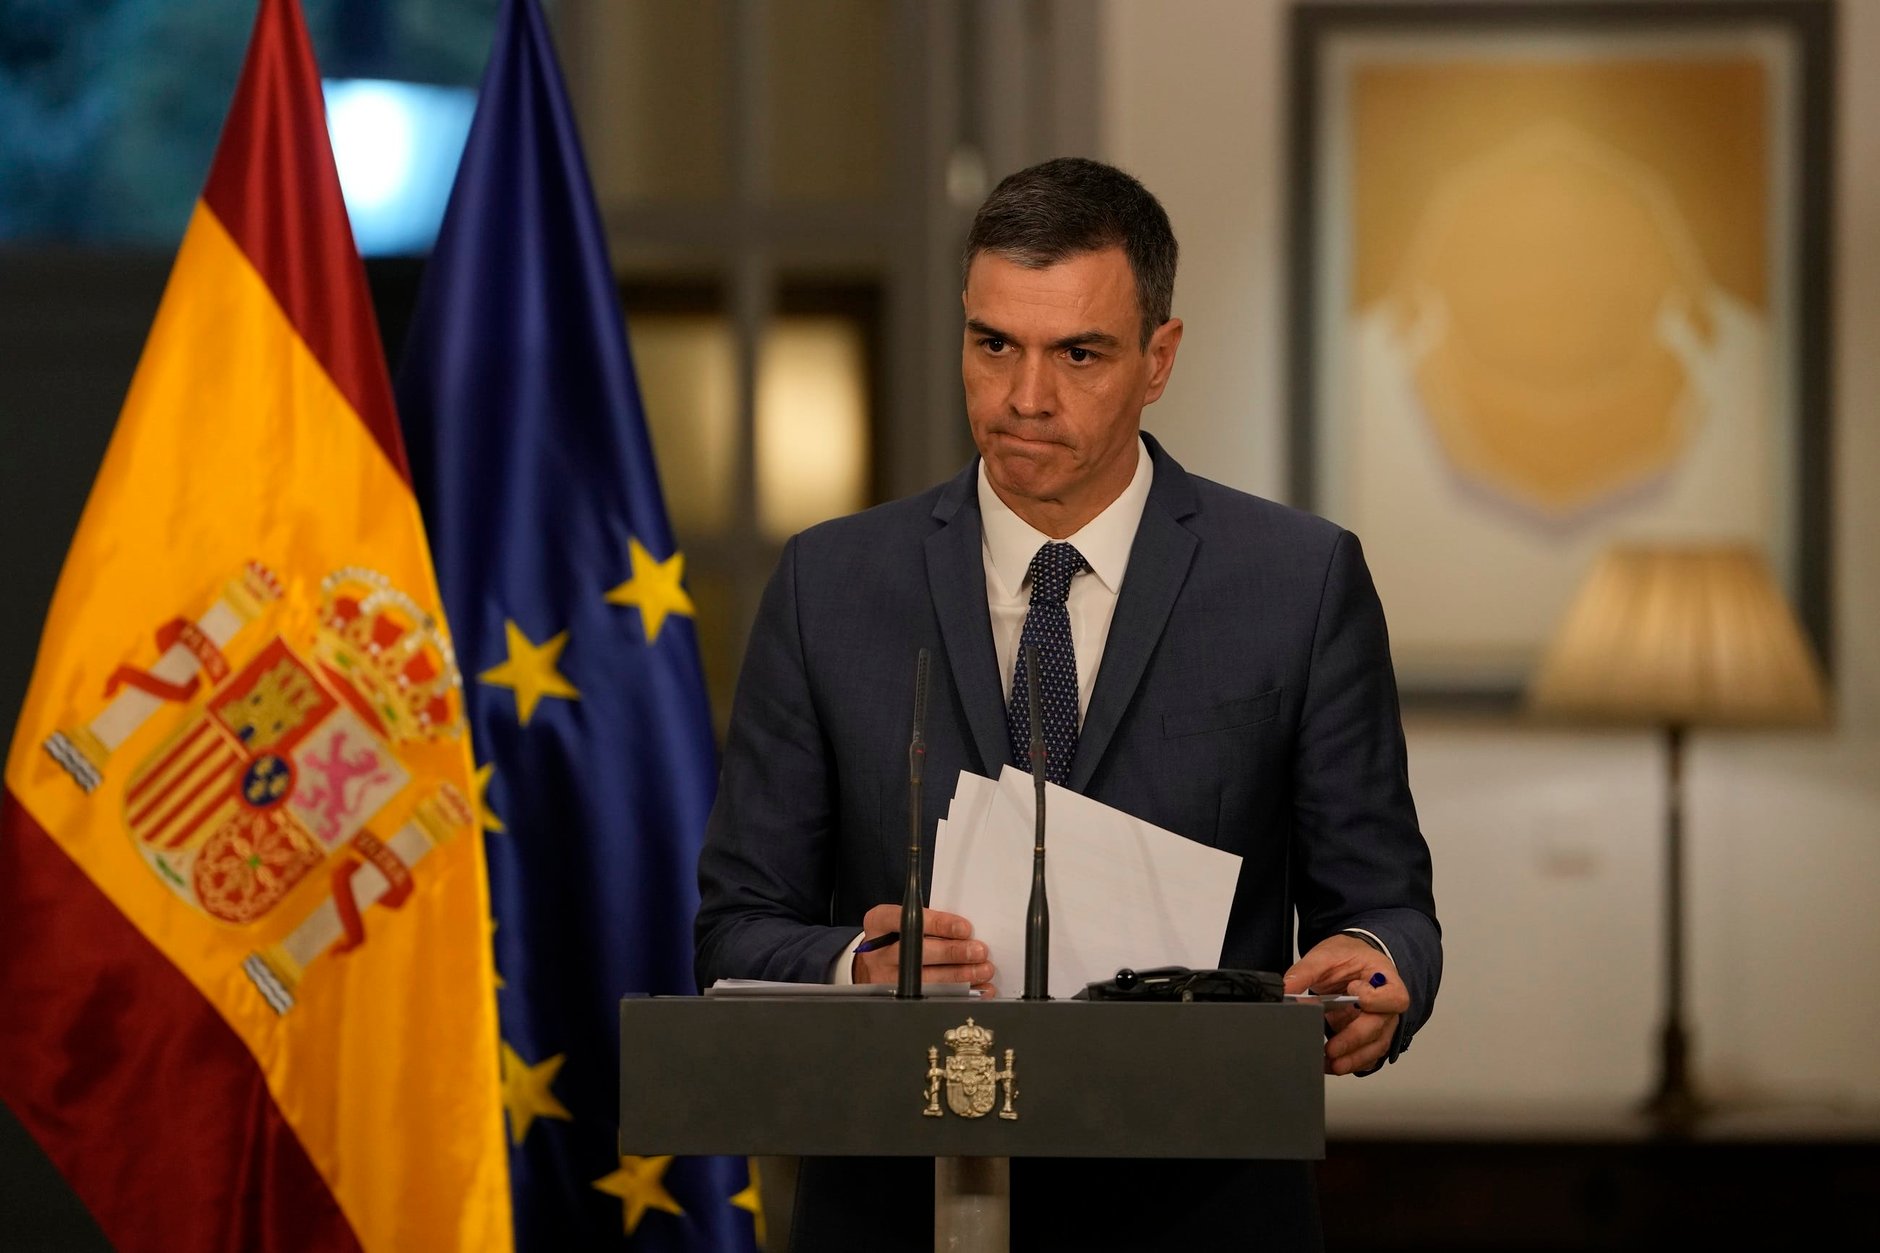 Socialist Spanish chief Sánchez mulls quitting amid corruption probe of wife | Courthouse News Service